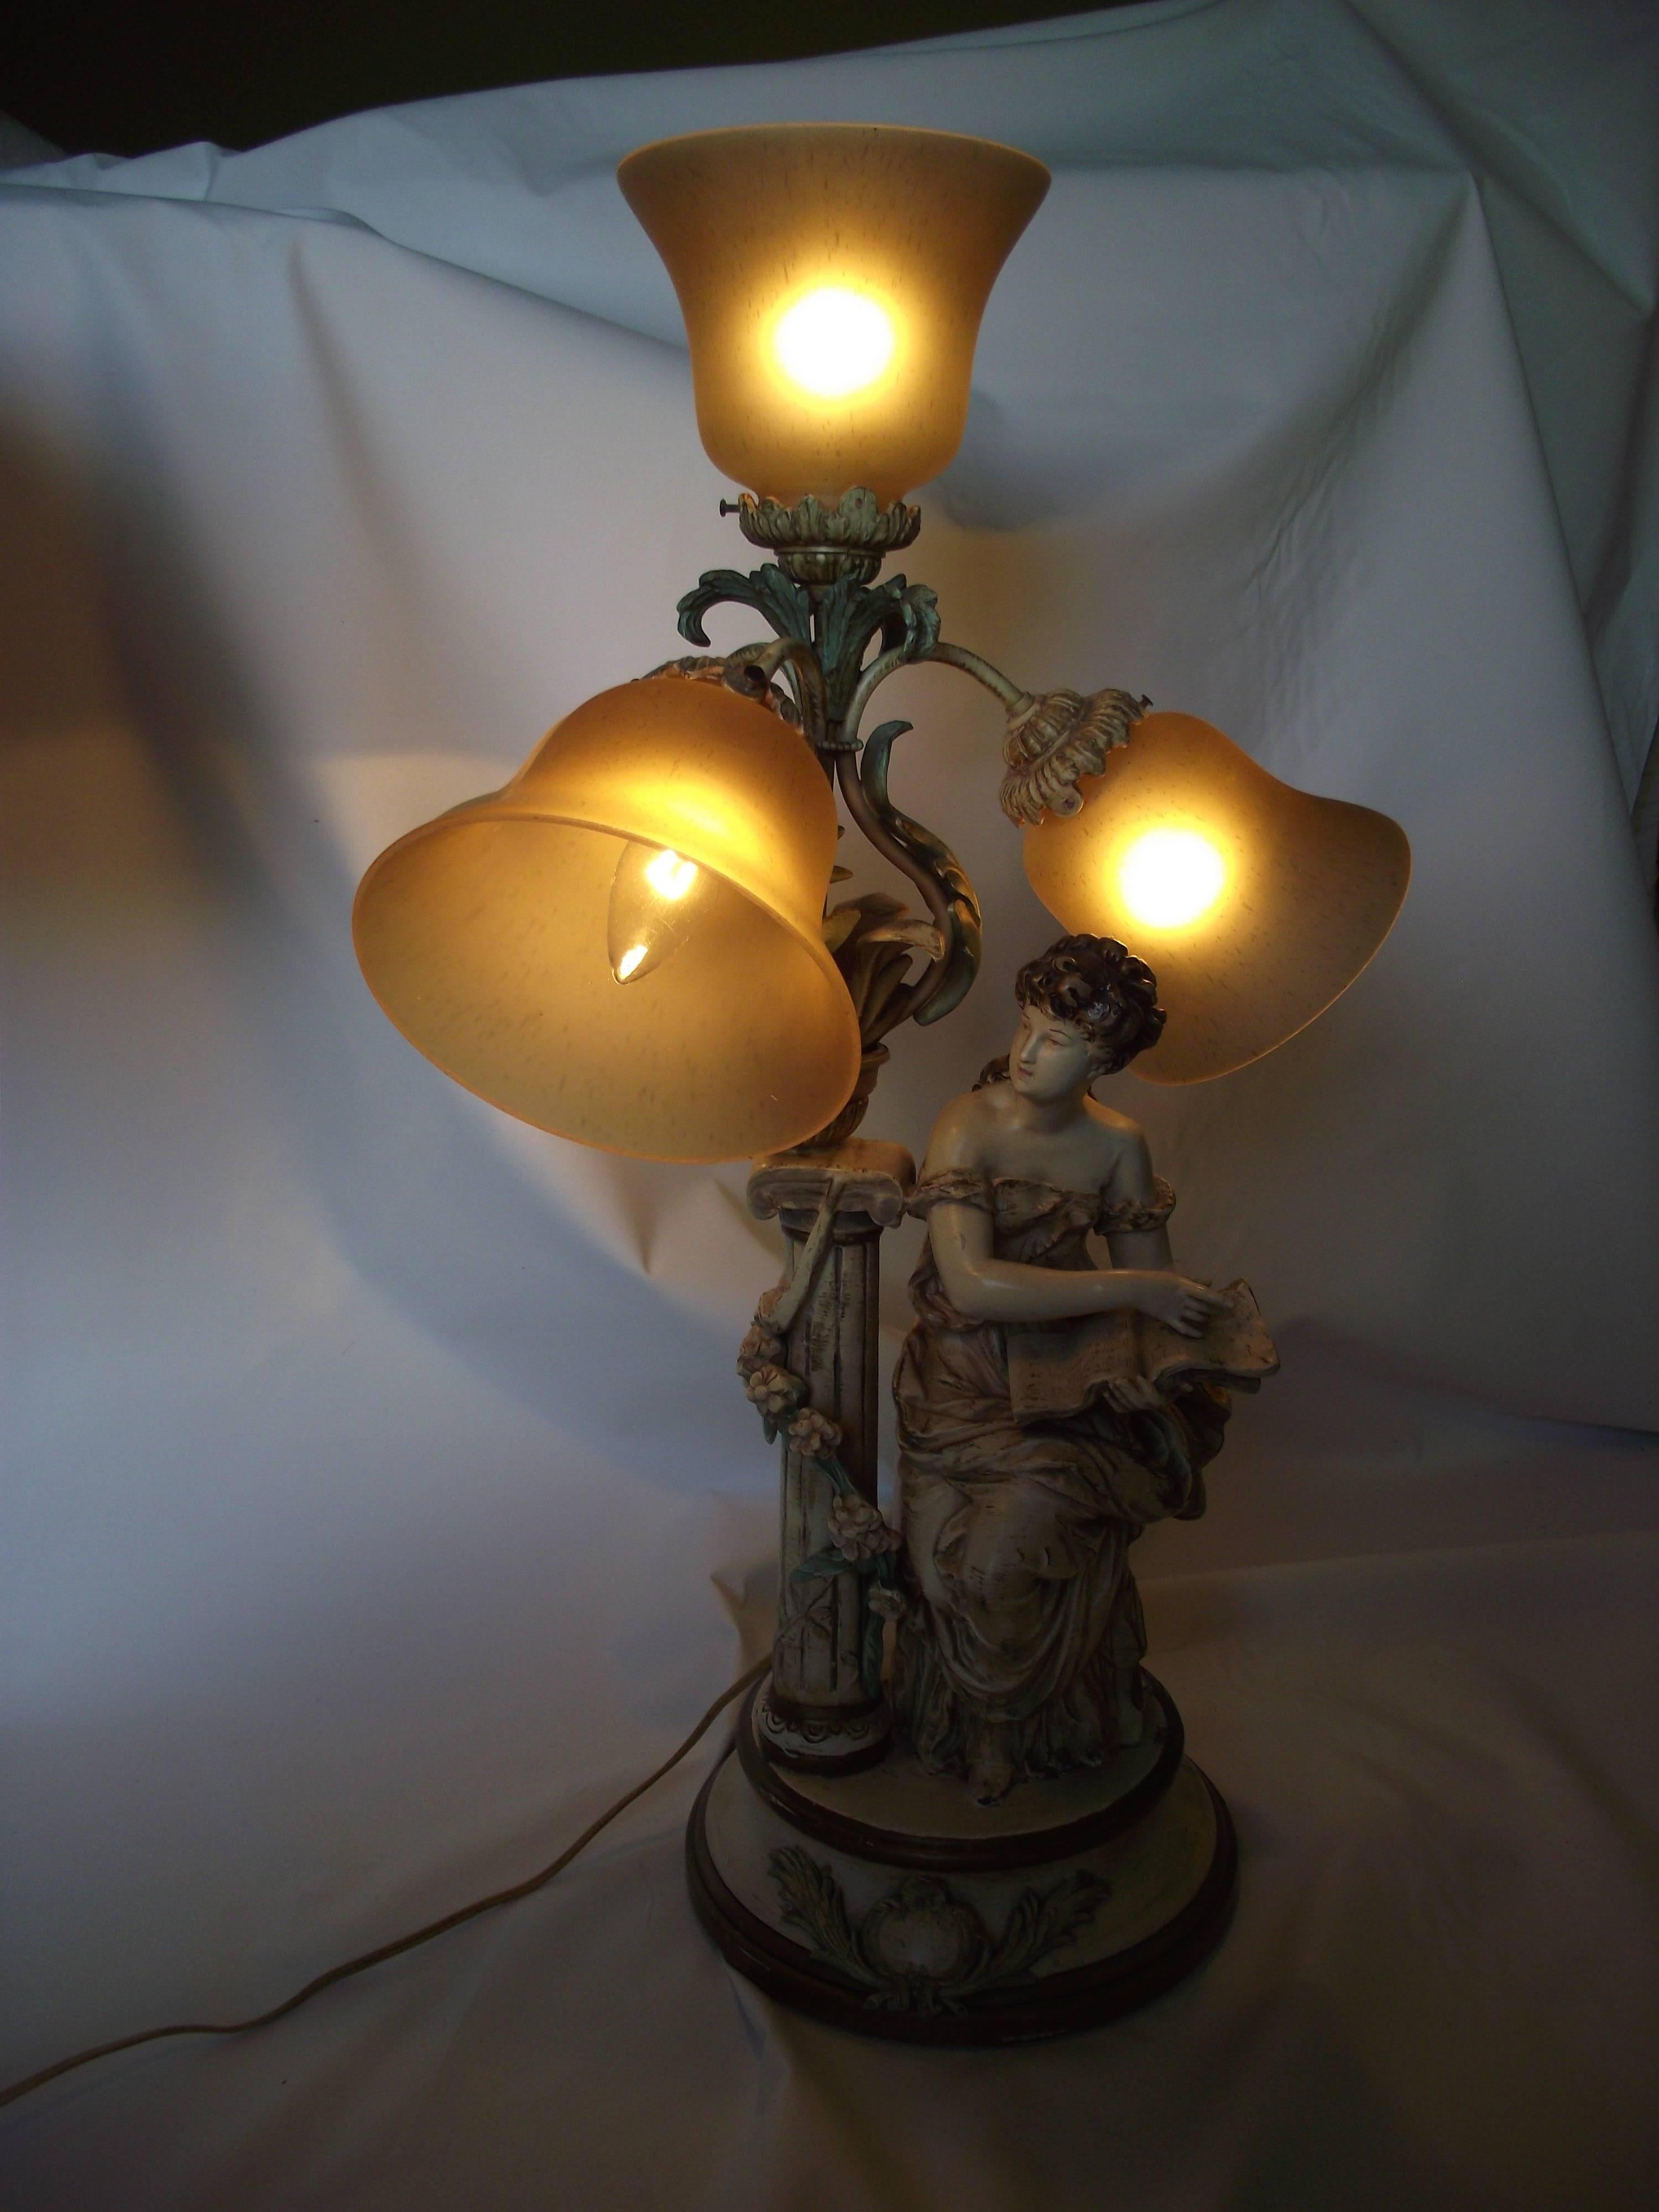 This beautiful Art Nouveau lamp represents Euterpe, Muse of Music. Original produced by brothers L & F Moreau the molds were hidden during WWII from the advancing Nazis army and forgotten. The molds were rediscovered by the JB Hirsh Company in 1948,